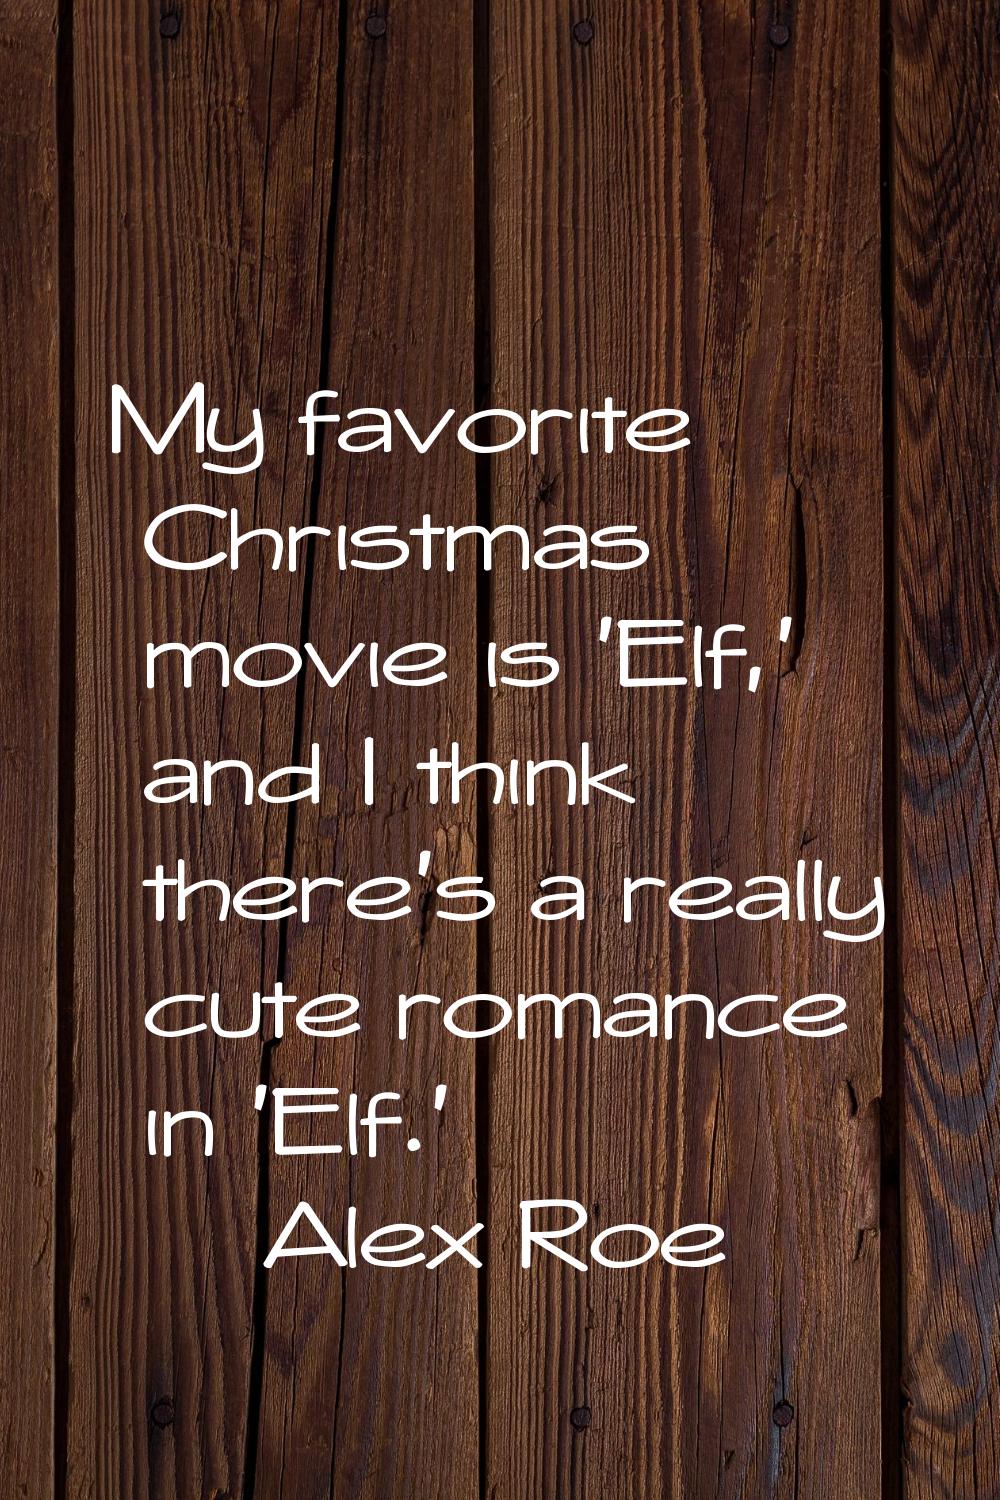 My favorite Christmas movie is 'Elf,' and I think there's a really cute romance in 'Elf.'